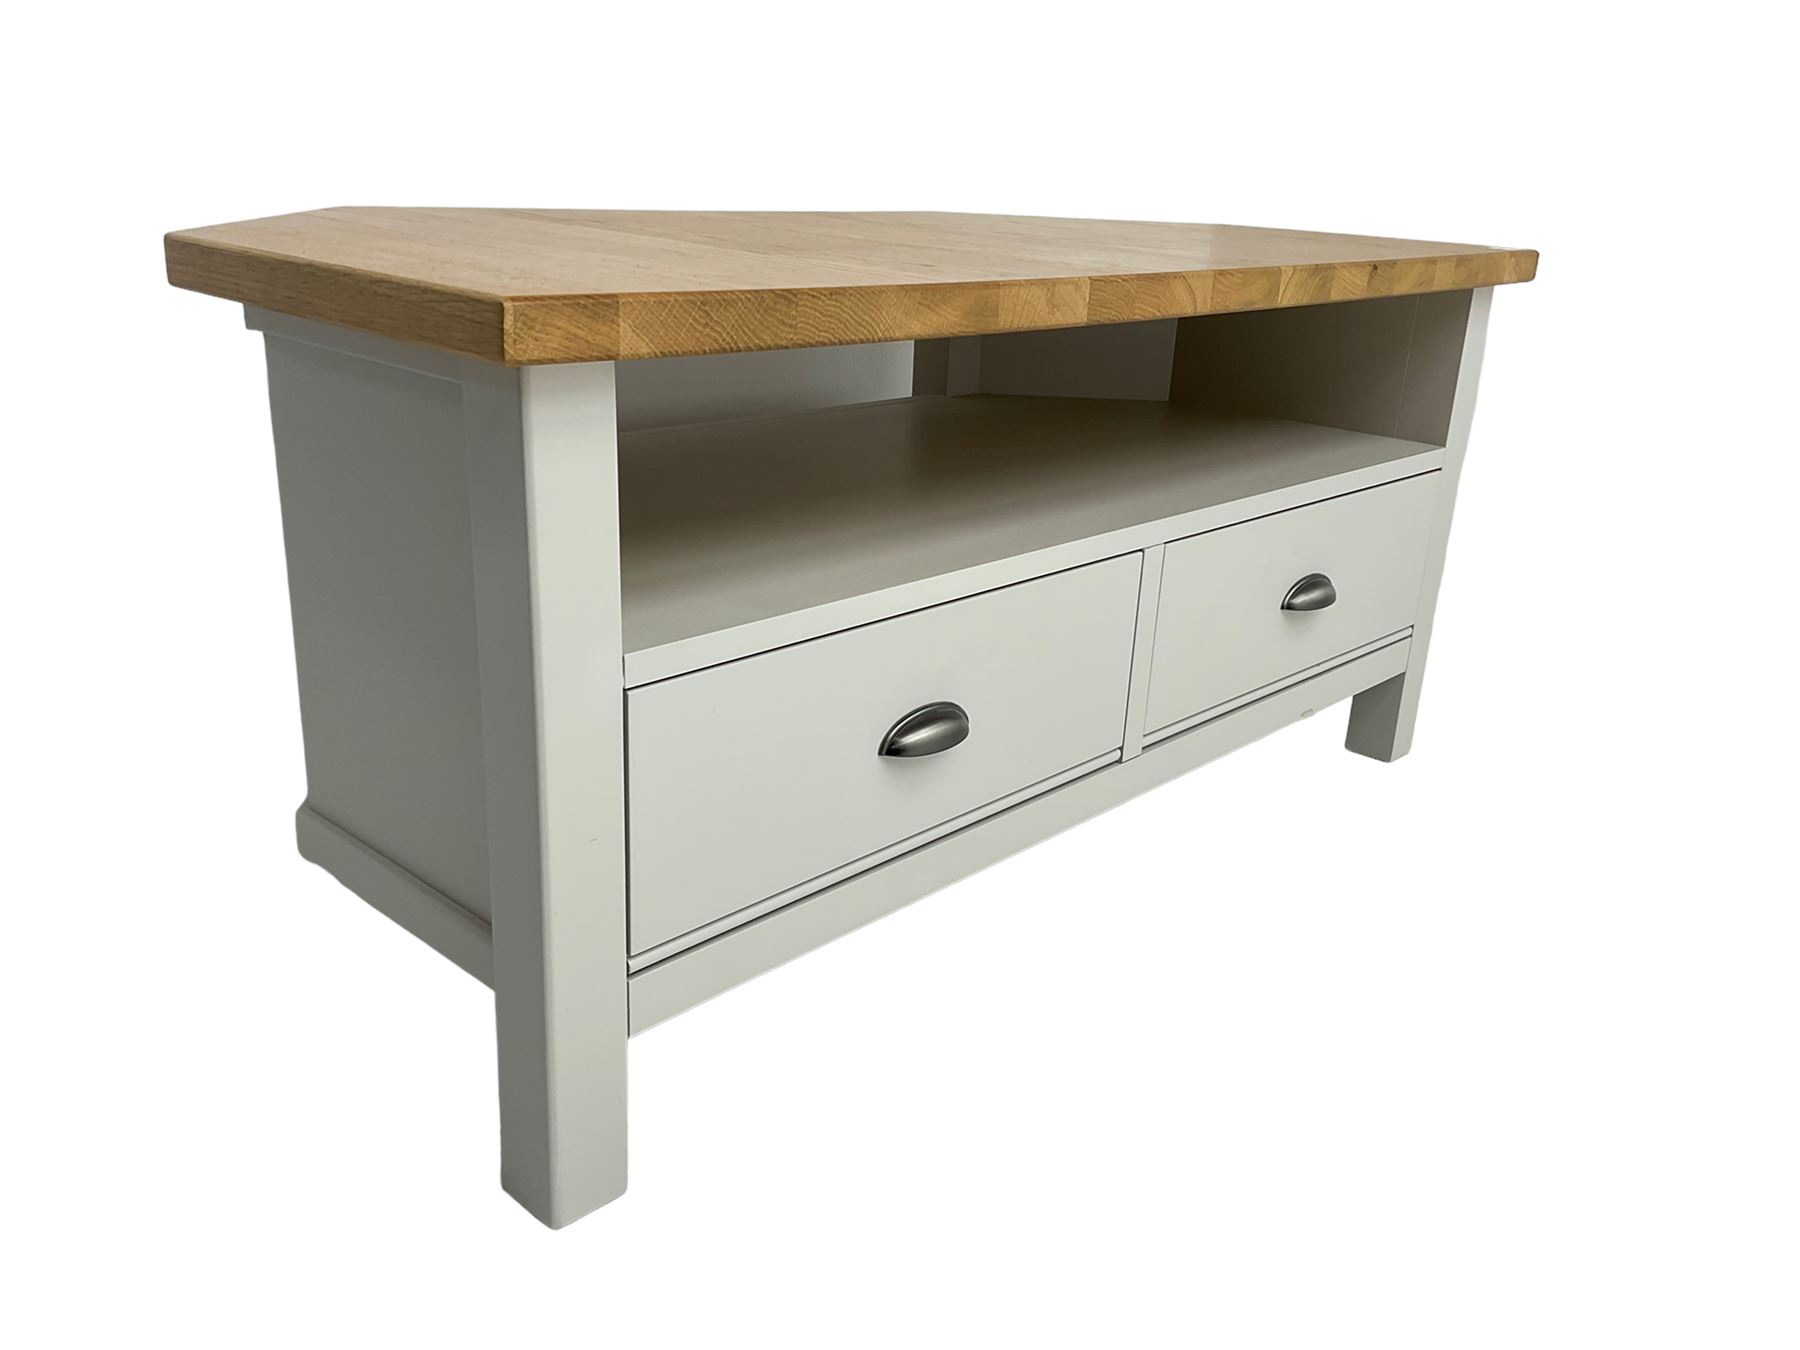 Marks & Spencer - grey finish corner television stand with oak finish top - Image 2 of 6